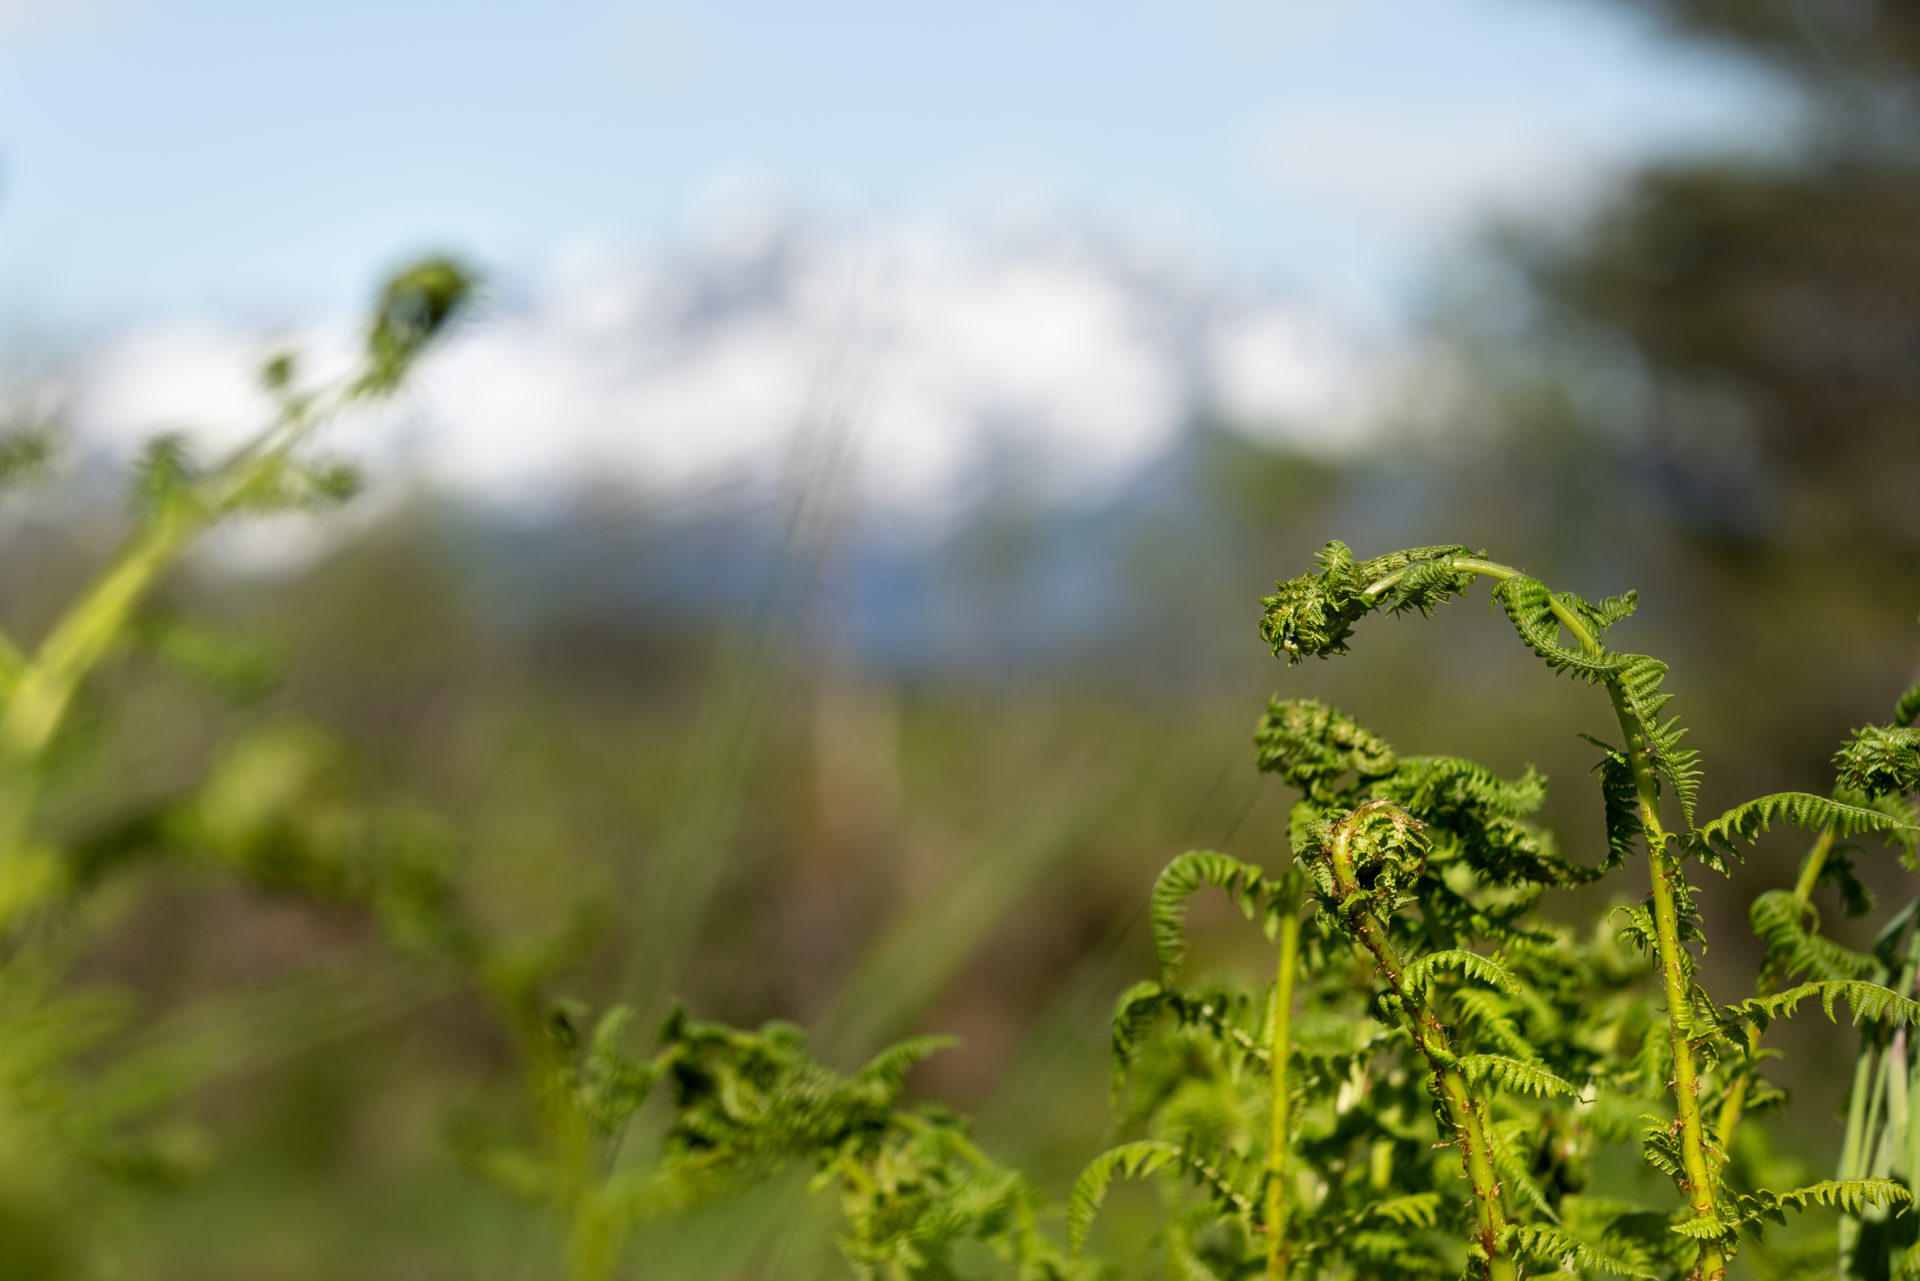 Fiddlehead shoots ready to be picked in Alaska.